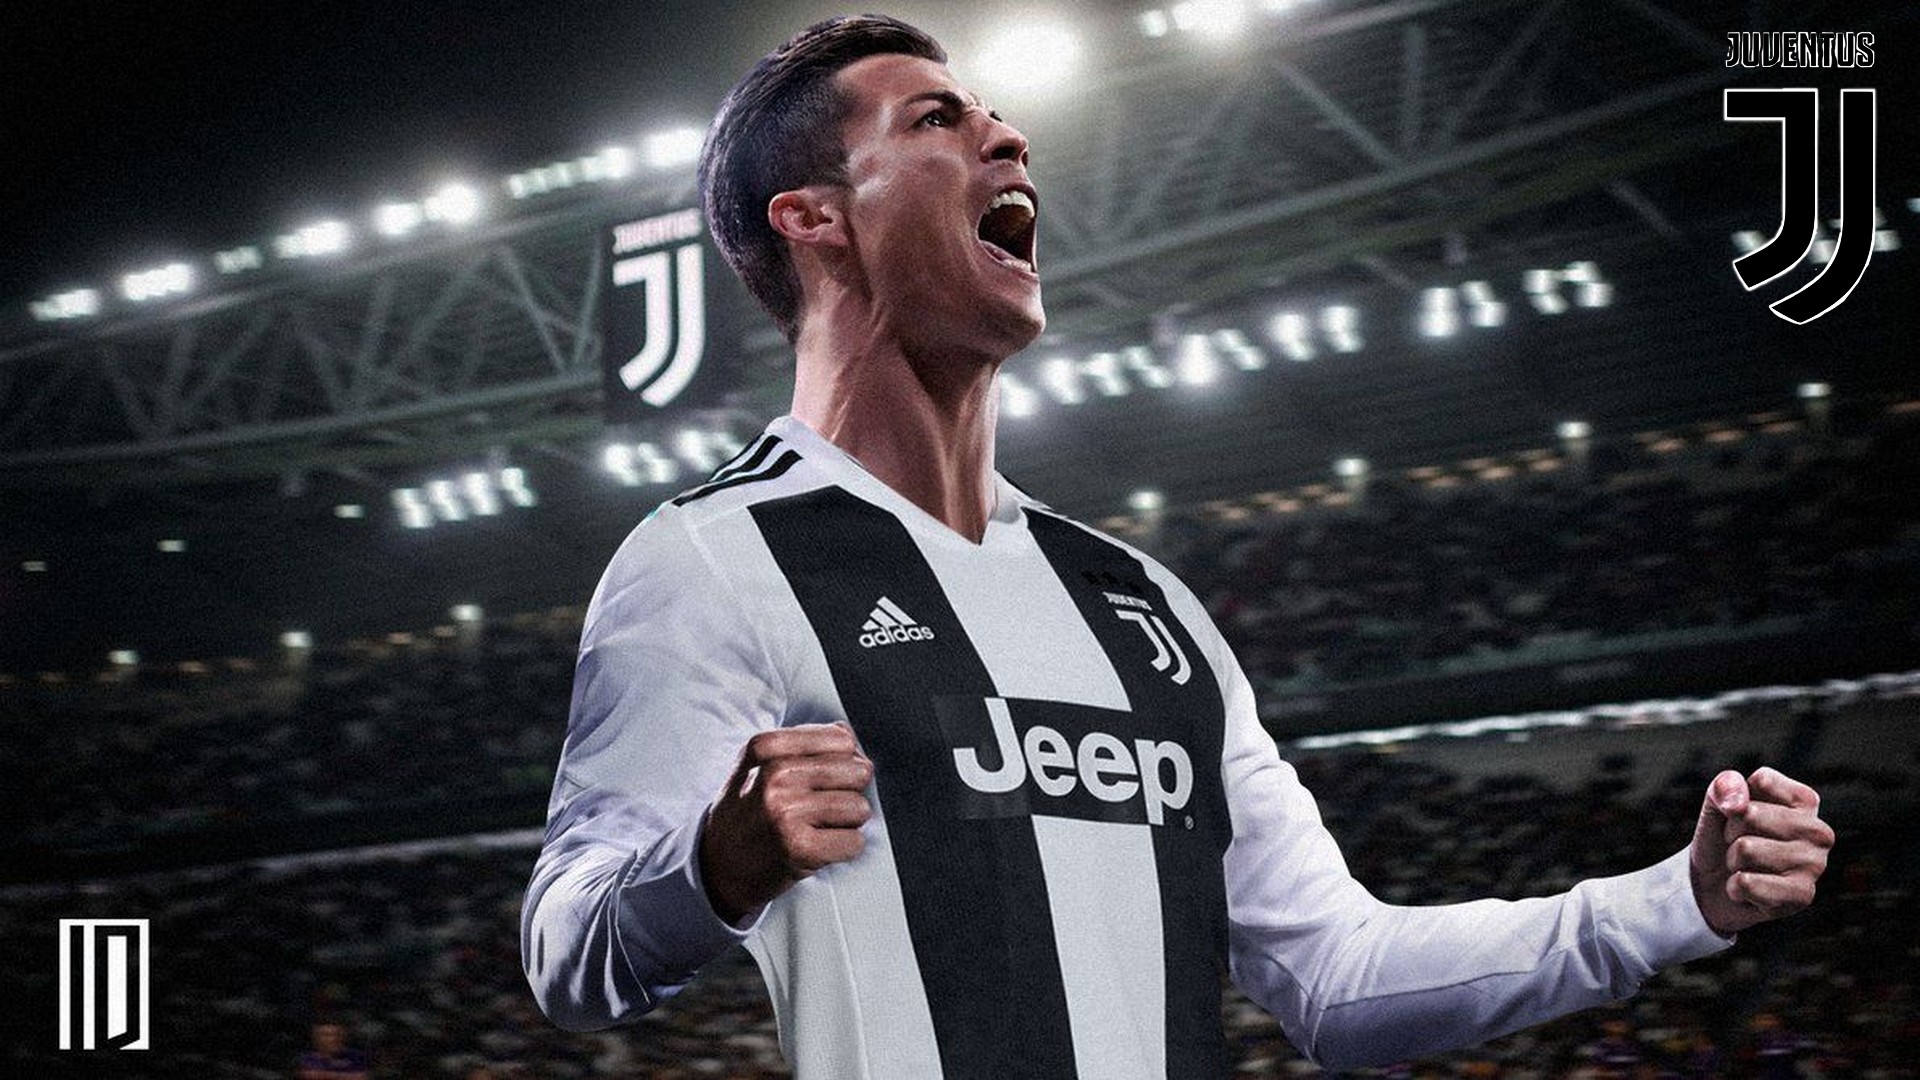 Ronaldo Juventus Desktop Wallpapers with resolution 1920x1080 pixel. You can make this wallpaper for your Mac or Windows Desktop Background, iPhone, Android or Tablet and another Smartphone device